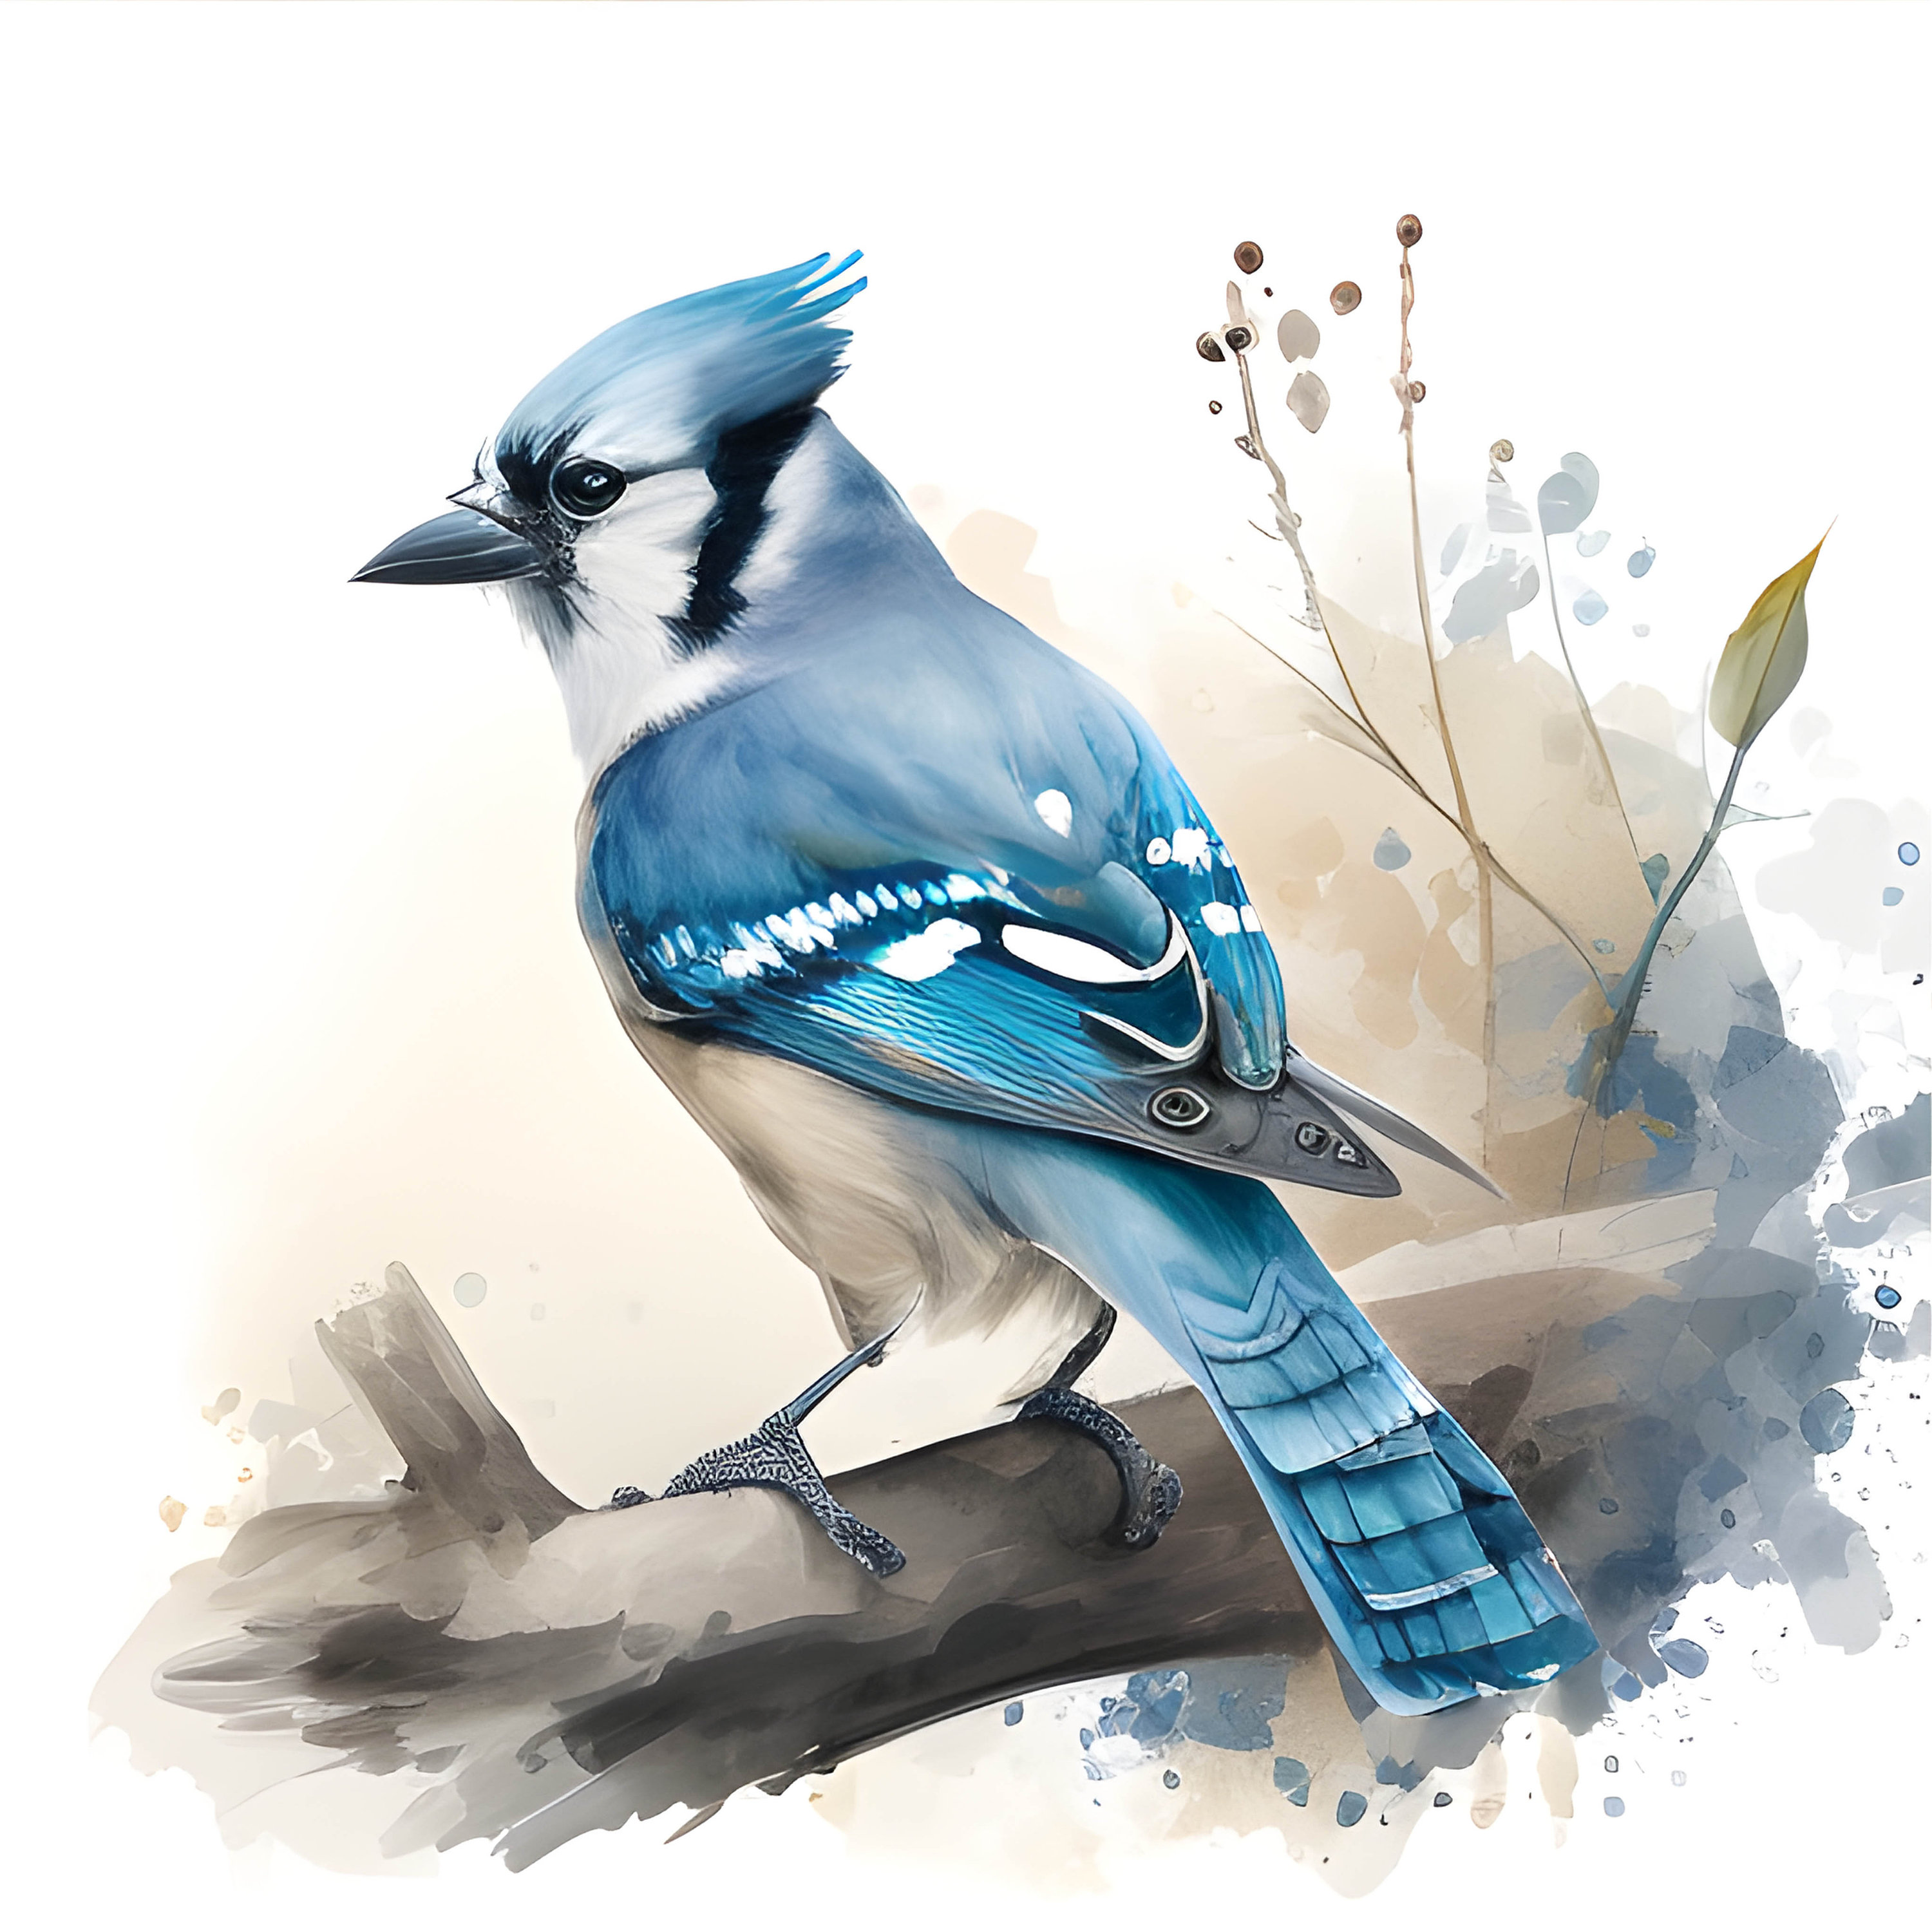 Buy Cute Blue Jay Cut Files PNG Blue Jays Clipart Bird Clip Art Online in  India 